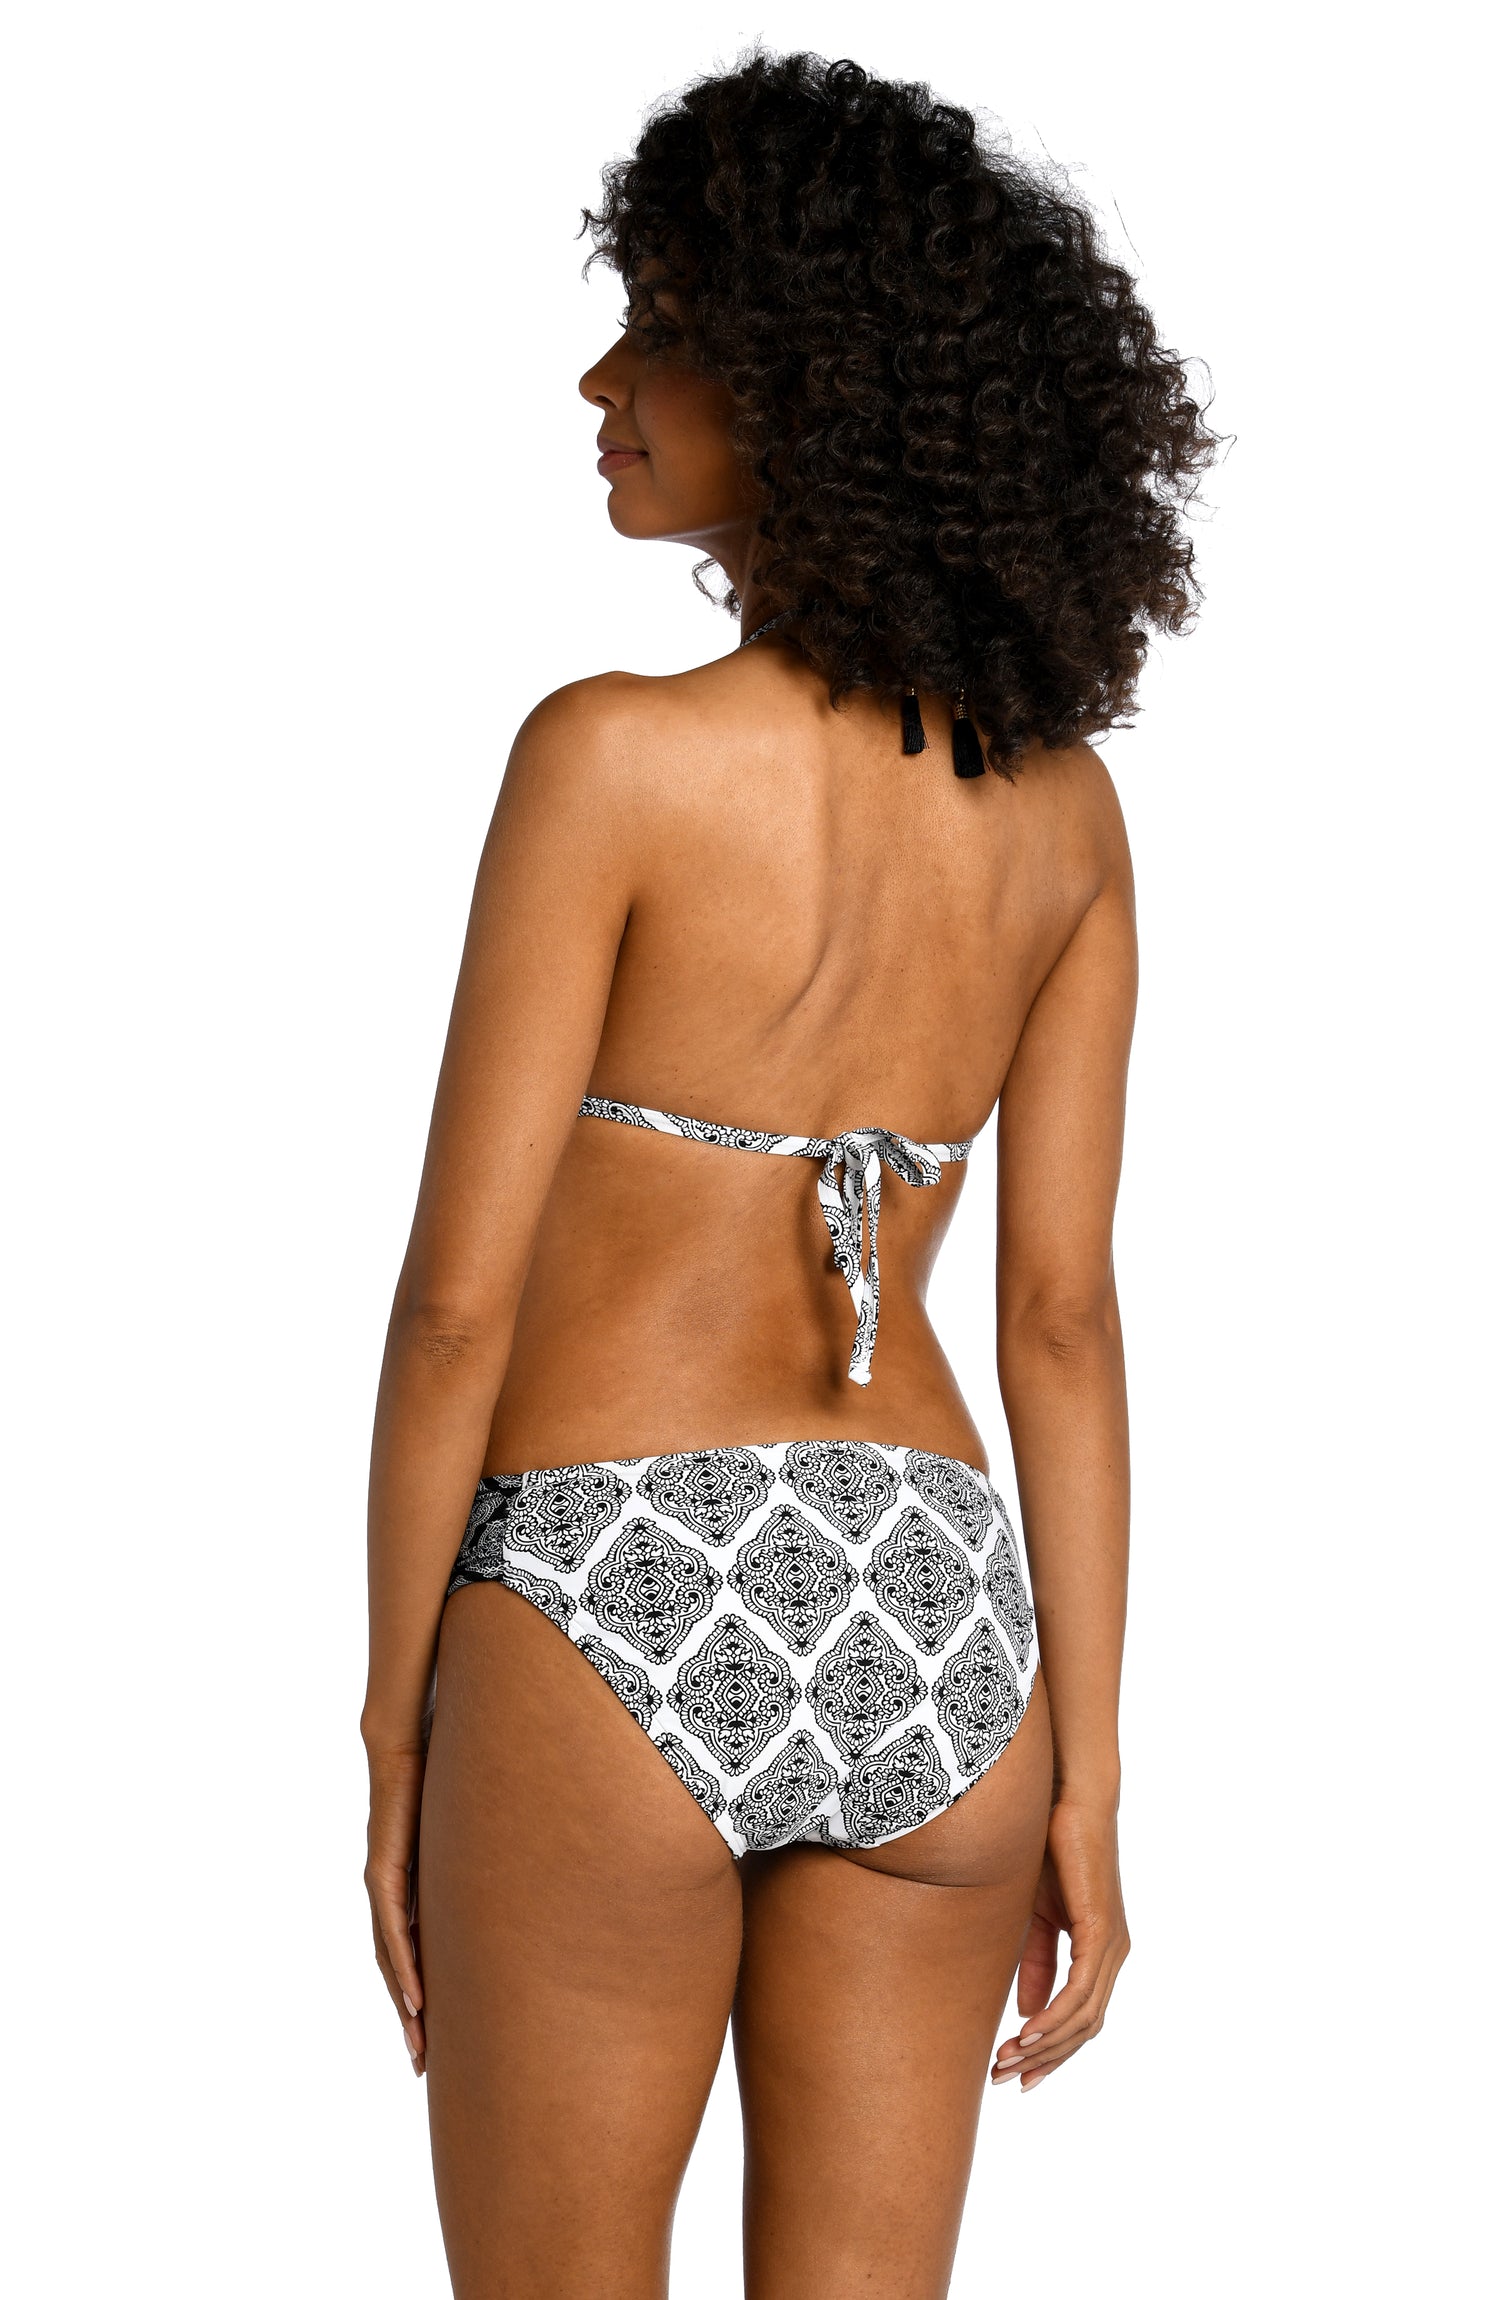 Model is wearing a black and white geometric printed halter triangle top from our Oasis Tile collection!